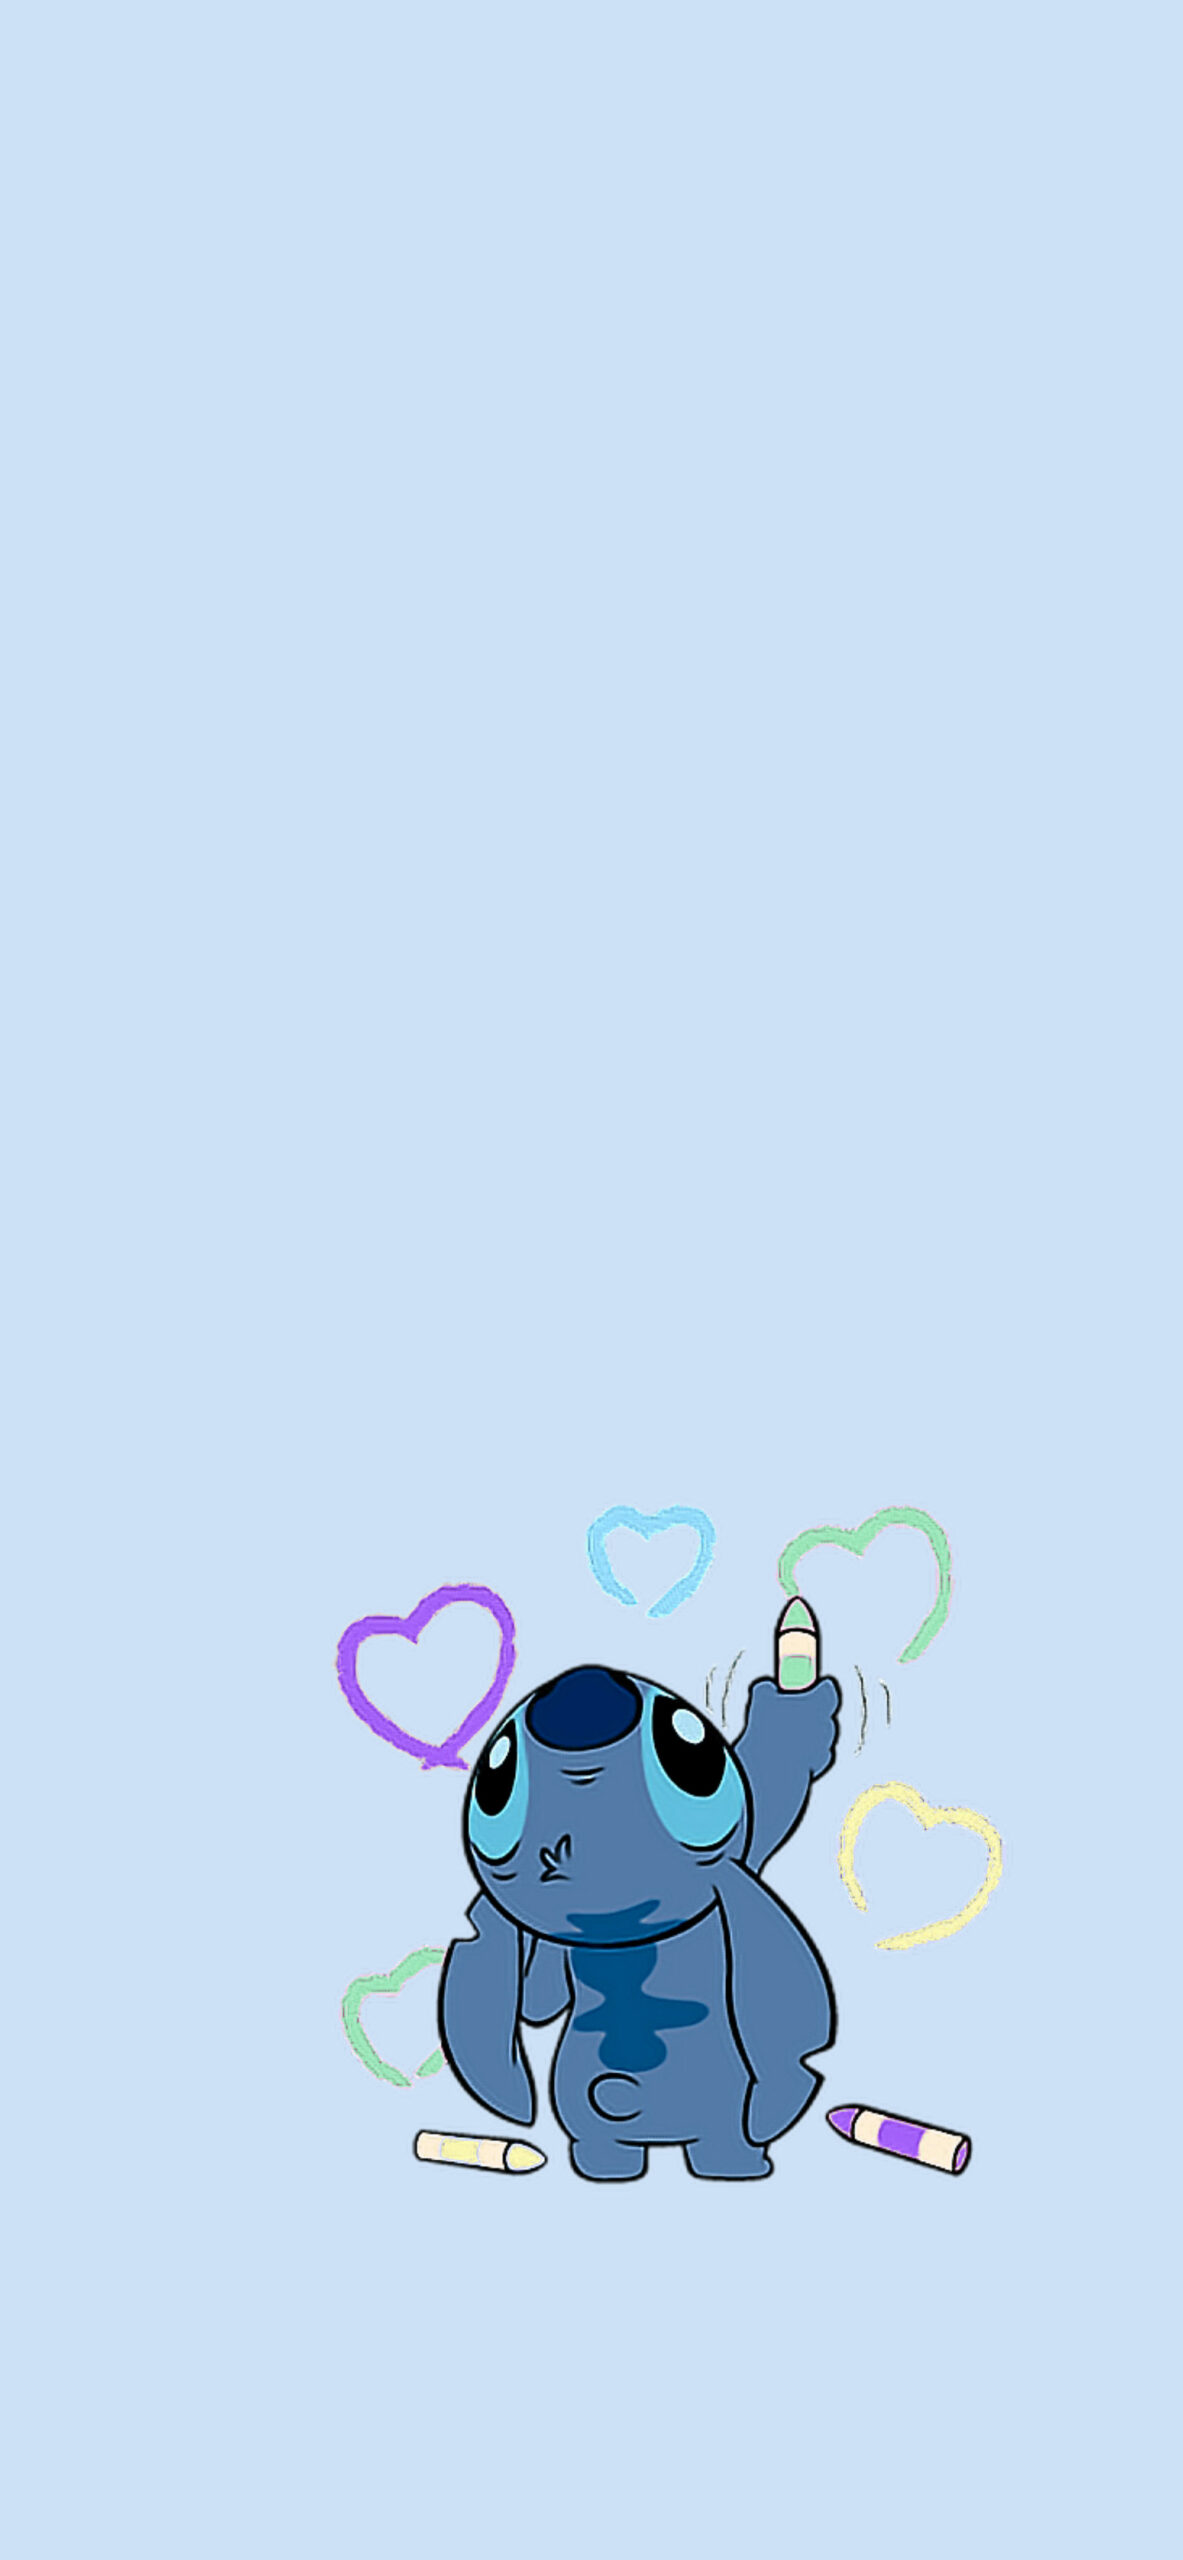 Aesthetic Stitch Wallpapers